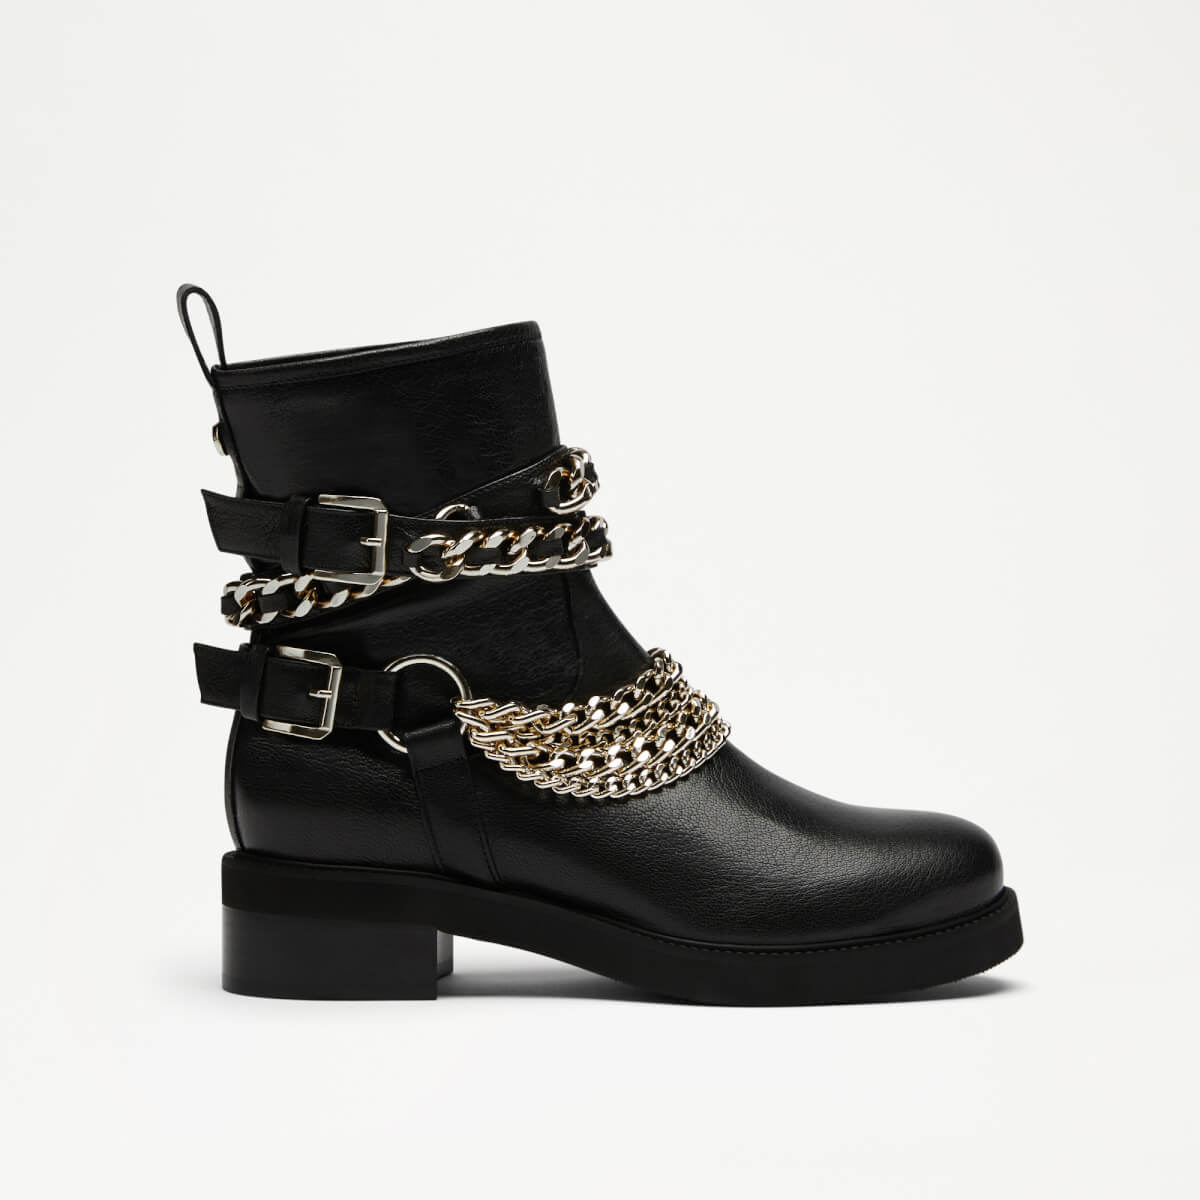 TRIXIE Glam Biker Ankle Boot